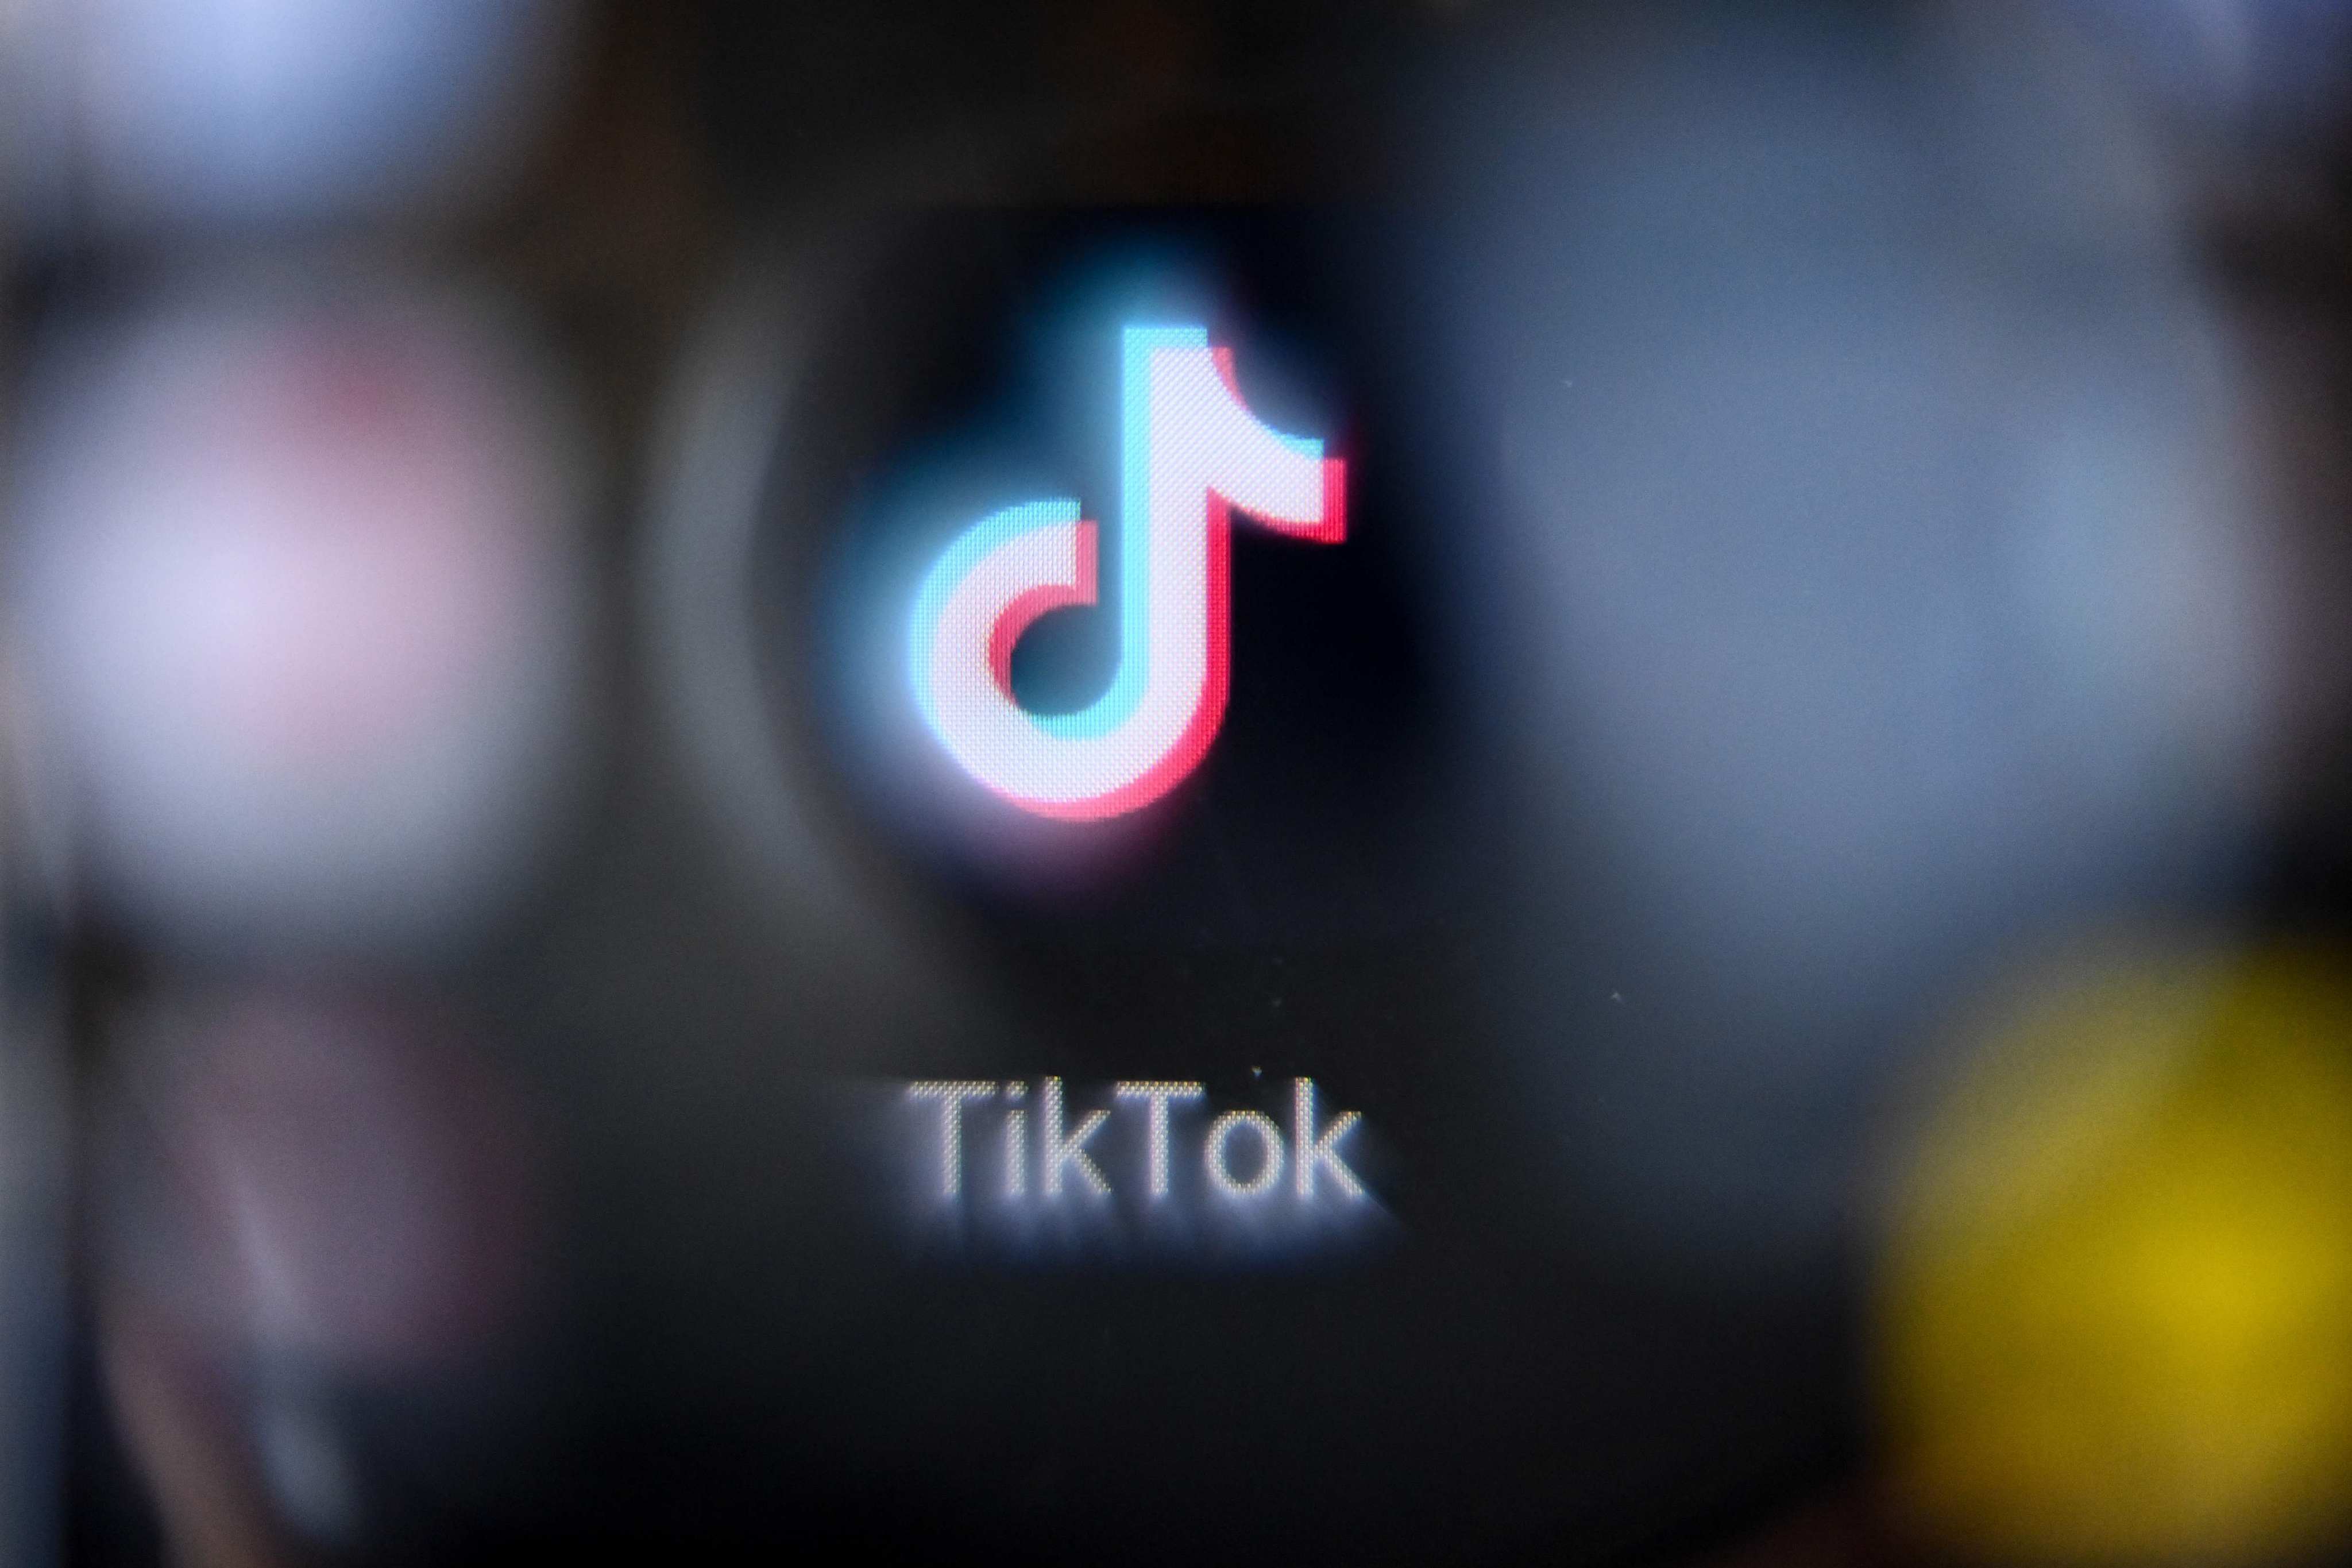 TikTok finds e-commerce success in Southeast Asia as political scrutiny and workplace woes weigh in the West | South China Morning Post